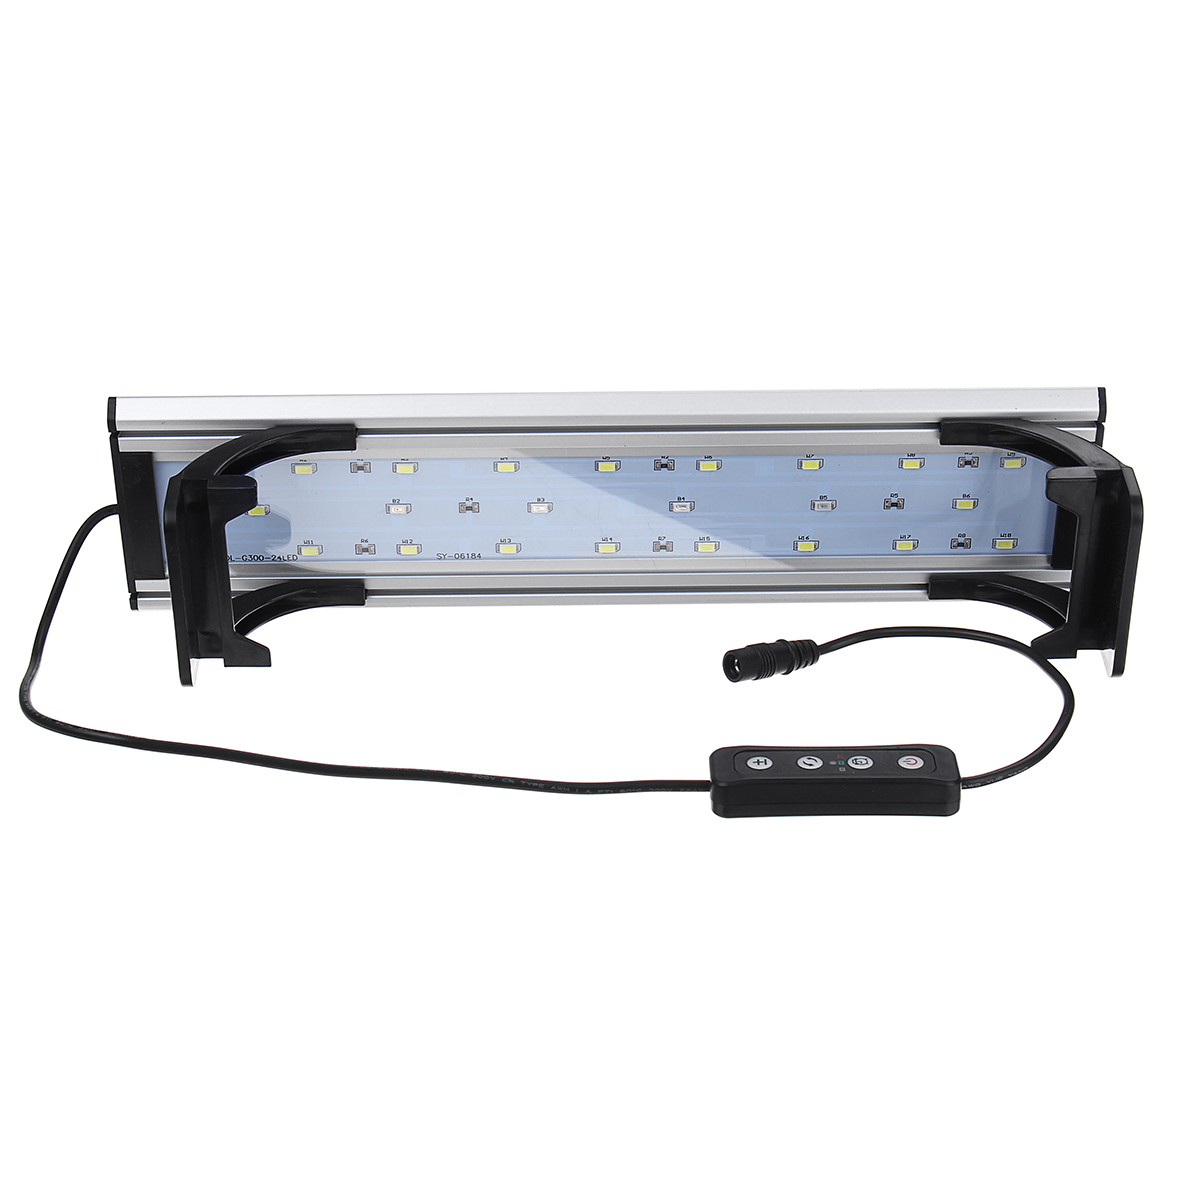 Dimmable--Timer-LED-Fish-Tank-Light-Lamp-Hood-Aquarium-Lighting-with-Extendable-Brackets-for-30CM-Ta-1639937-3